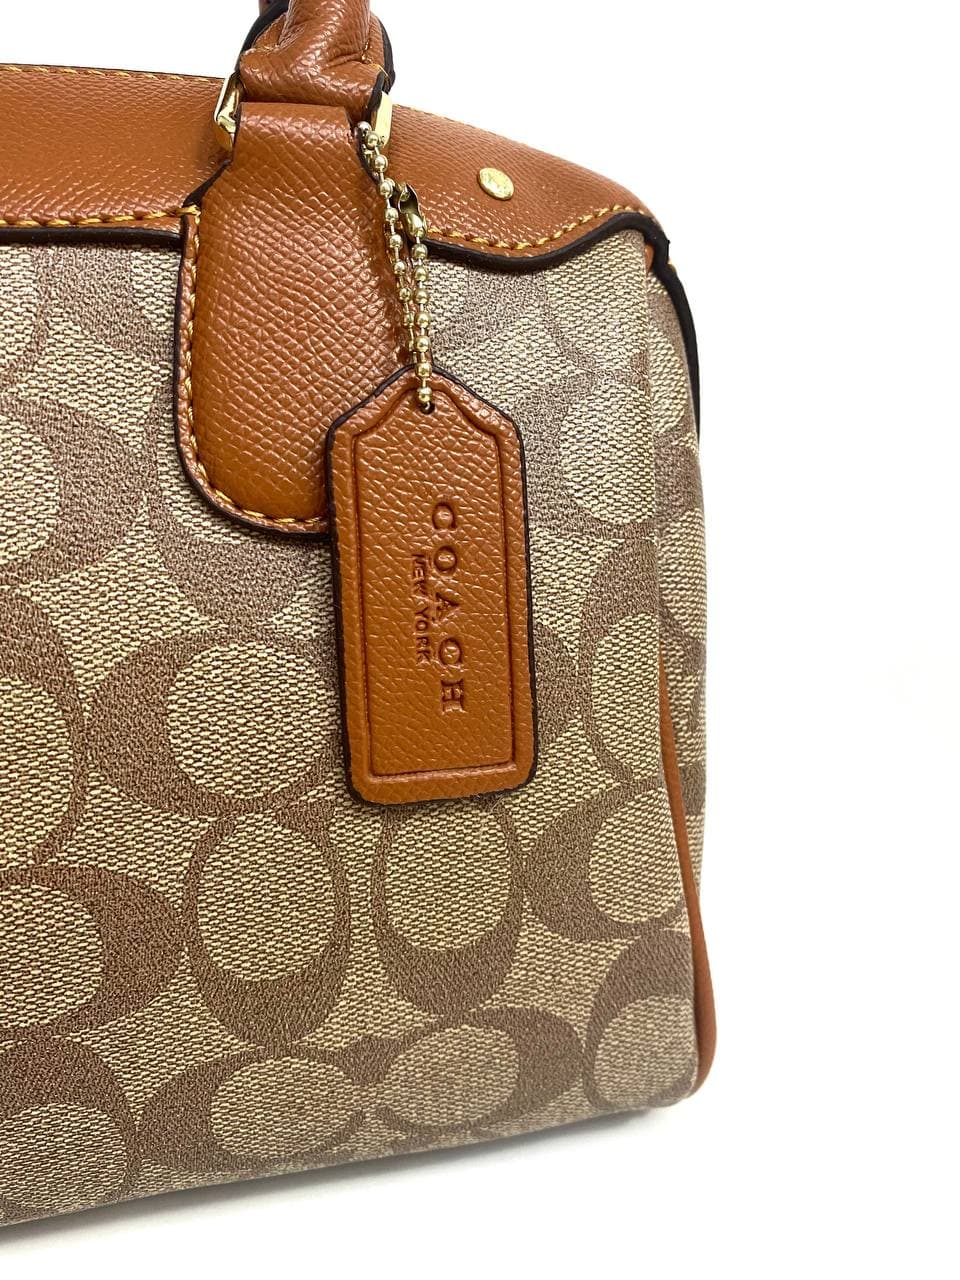 Coach Bennett Small Bag in signature - Puzzles Egypt